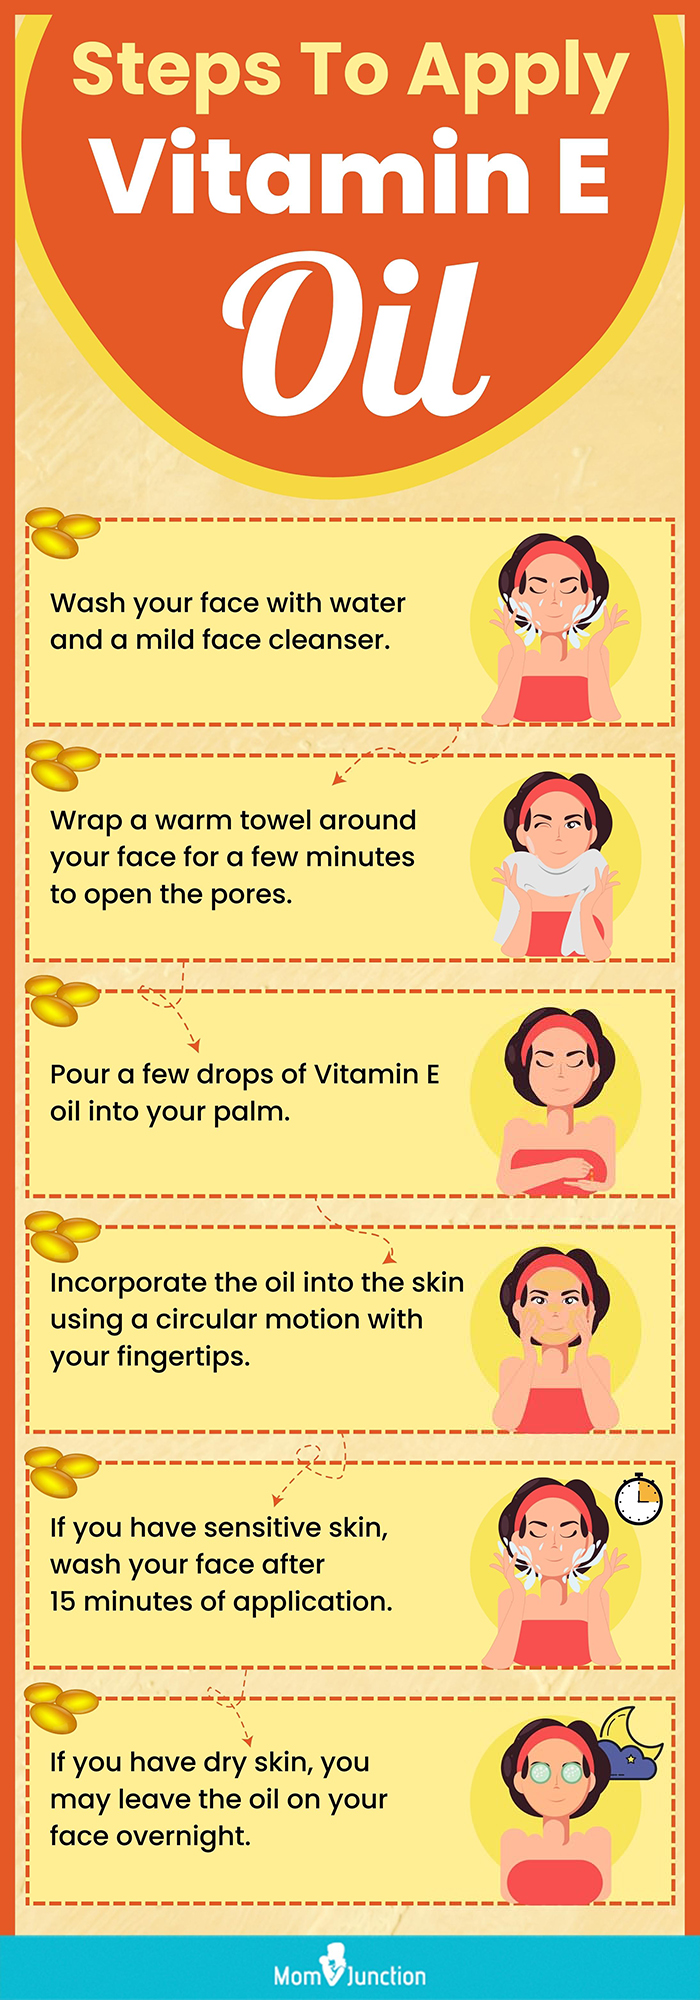 Steps To Apply Vitamin E Oil (infographic)